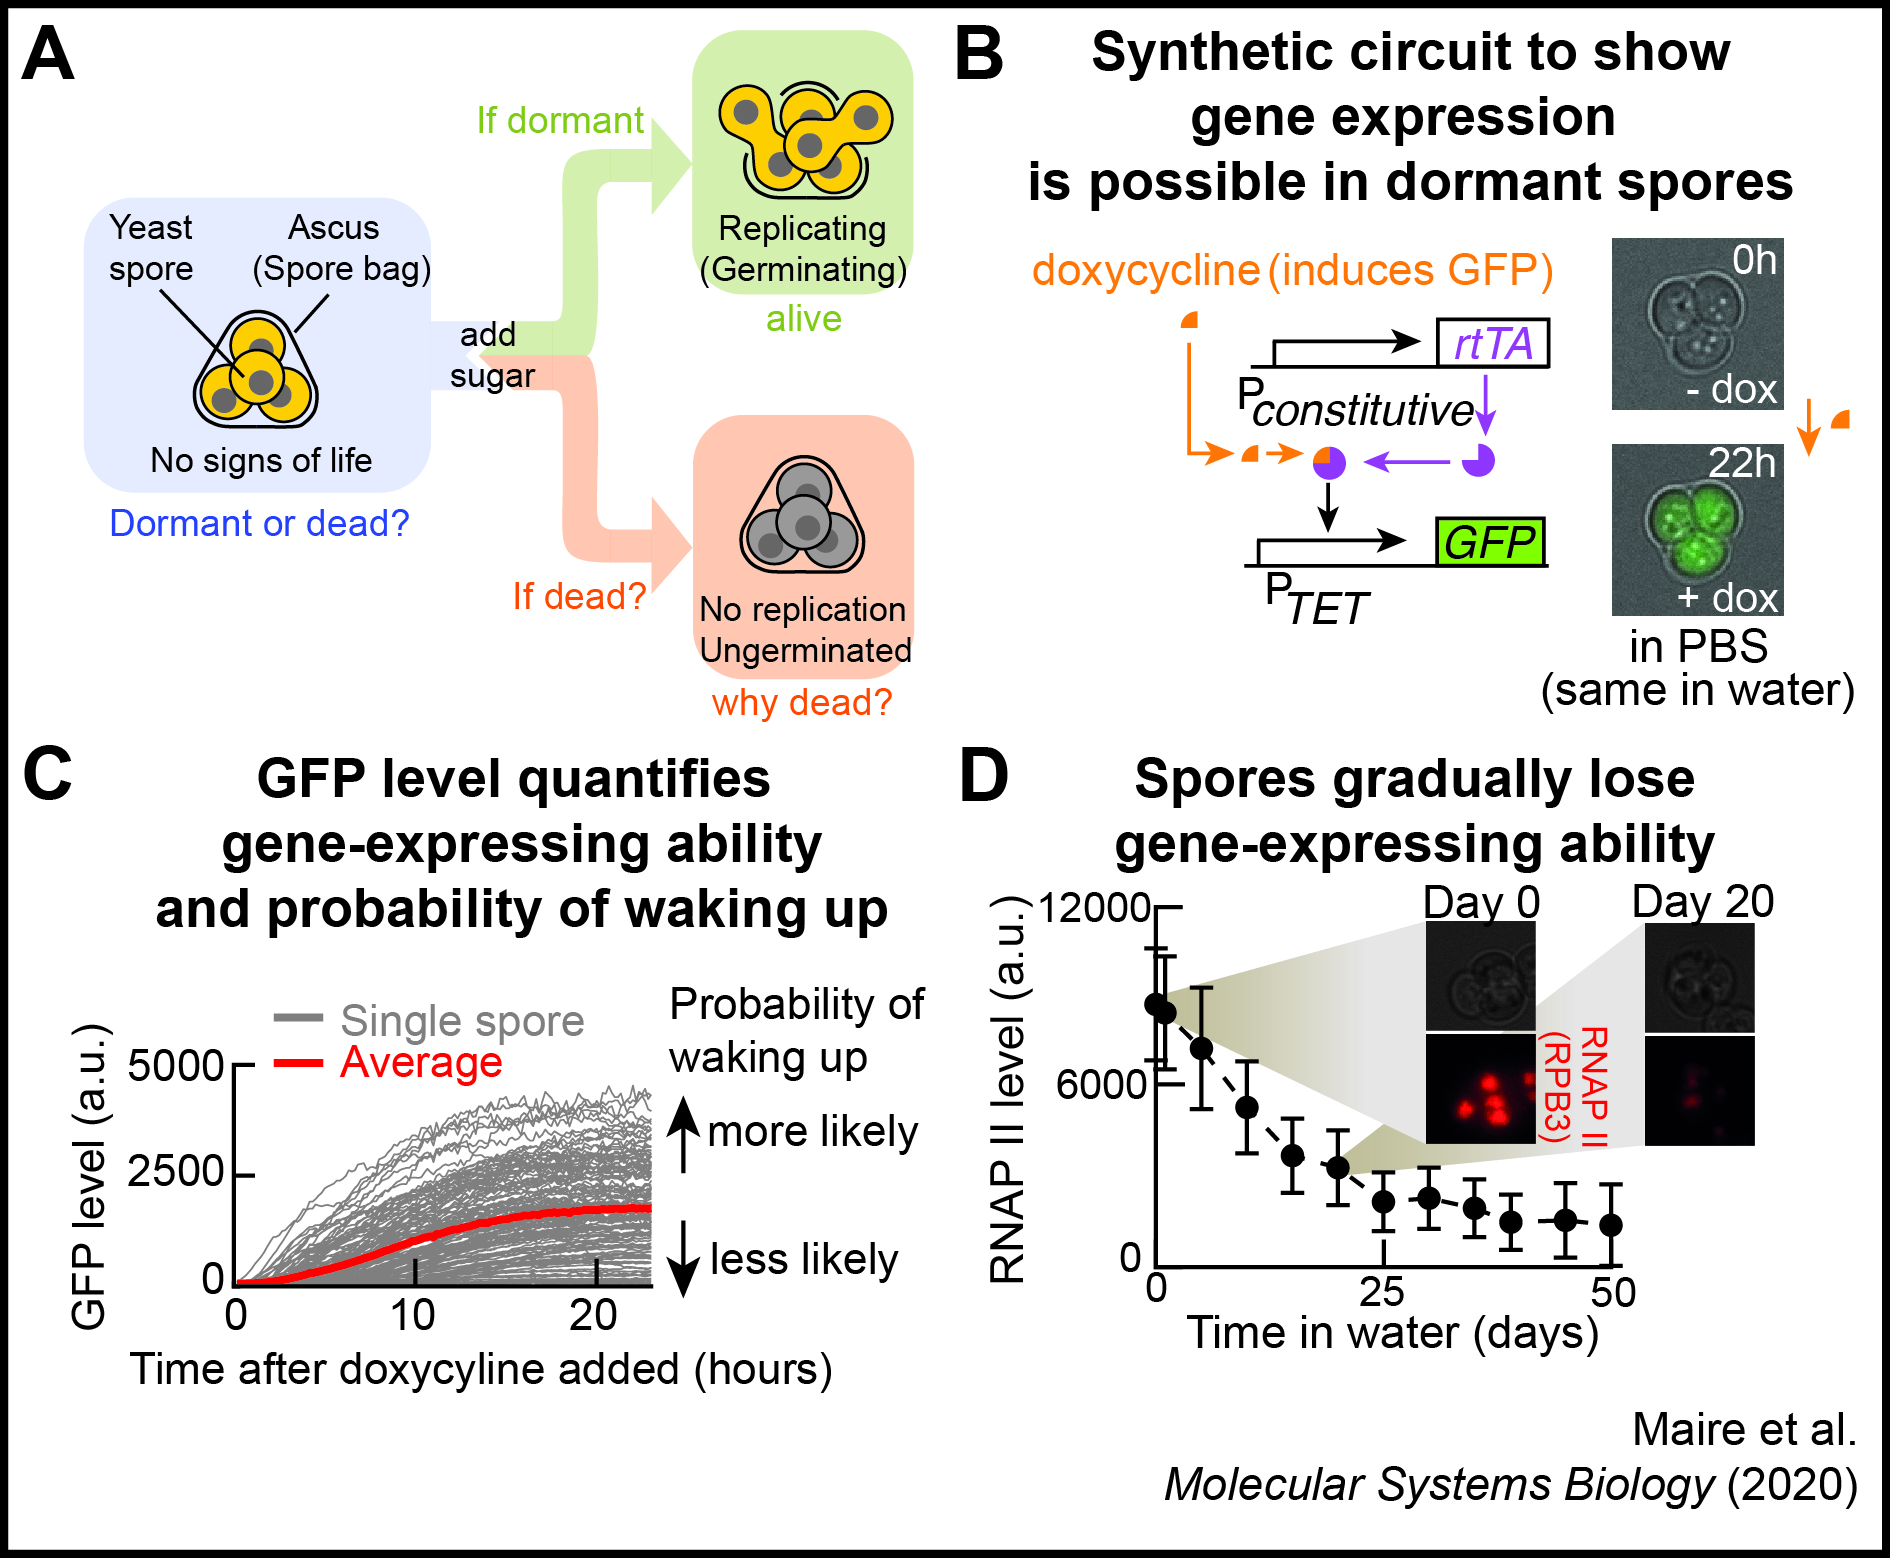 In Maire et al. (2020), we used yeast spores as a model for eukaryotic cell-dormancy to show 
that some dormant spores can express genes without any nutrients (e.g., in water). 
In fact, we discovered that dormant yeast spores must express genes to remain viable 
(i.e., to have the ability to self-replicate when nutrients appear). How can dormant spores even 
express genes for months to years without any external nutrients? What are the principles of 
gene expression in dormancy?  We’re quantitatively addressing these questions in
dormant yeast spores.